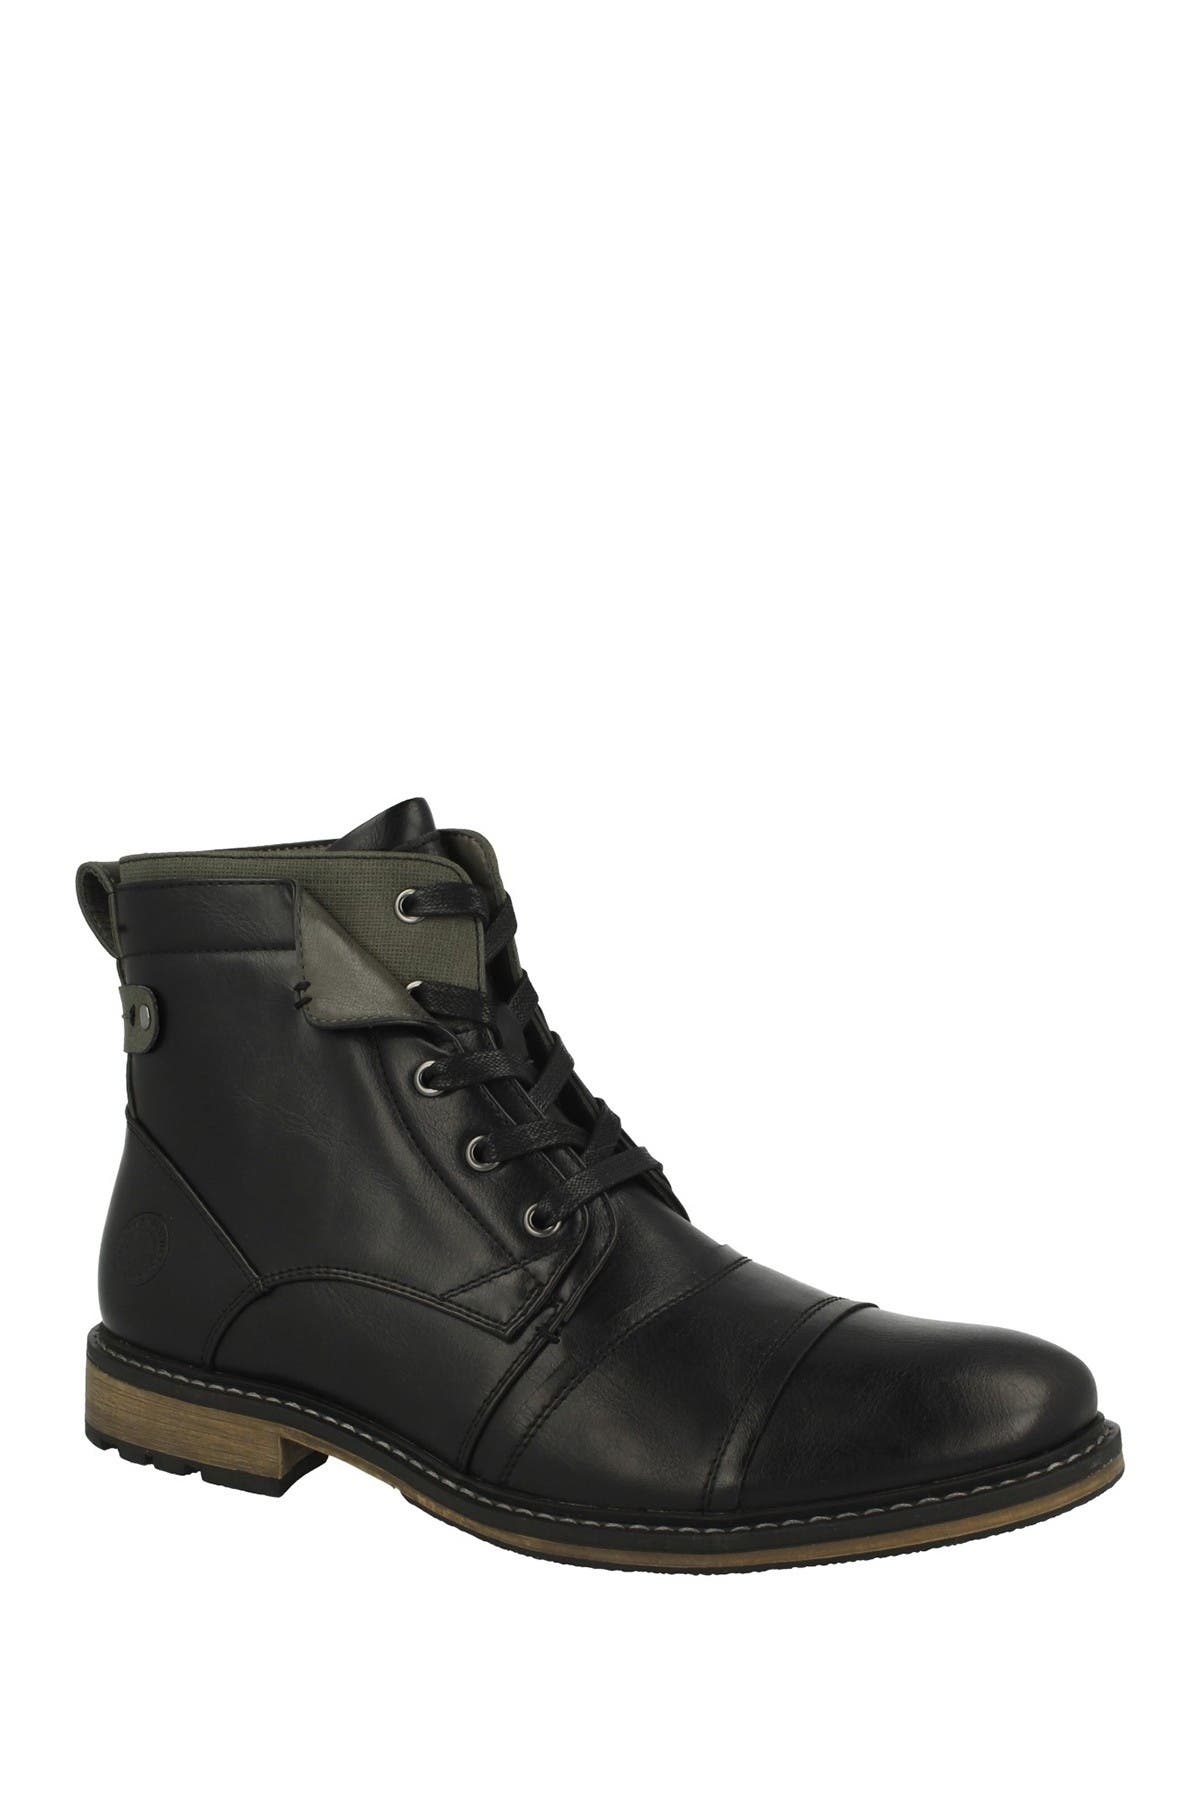 bullboxer lace up boots